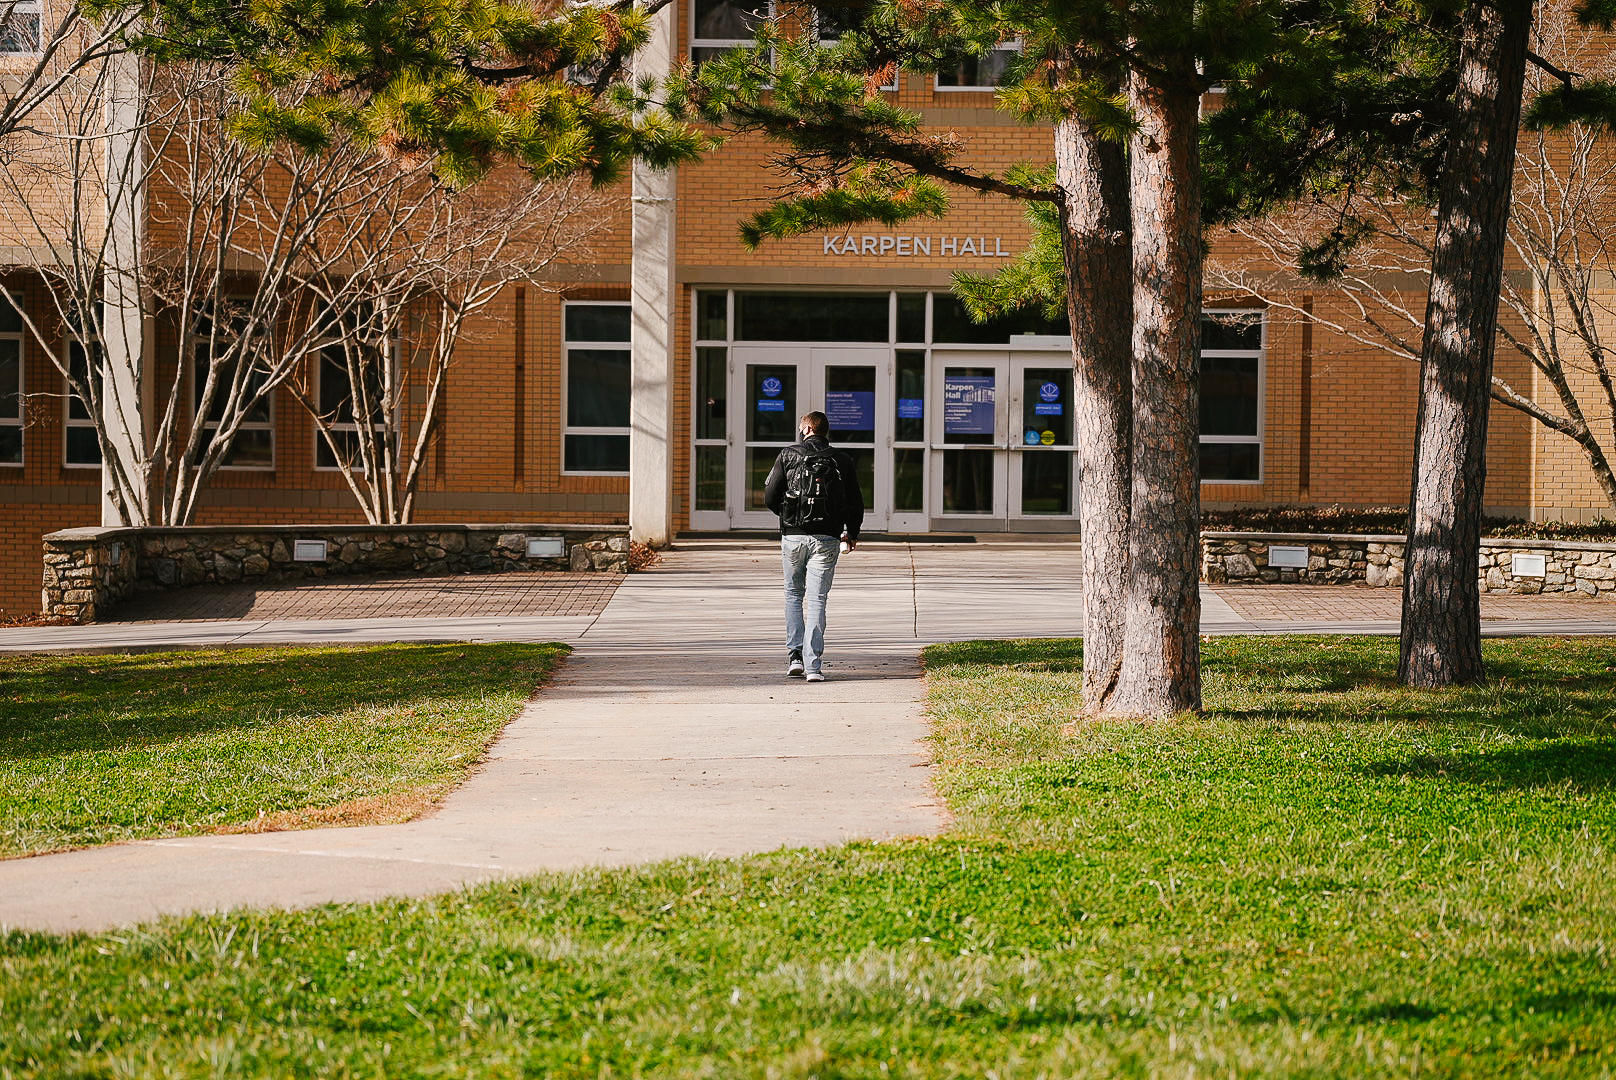 A person walking toward the front doors of Karpen hall